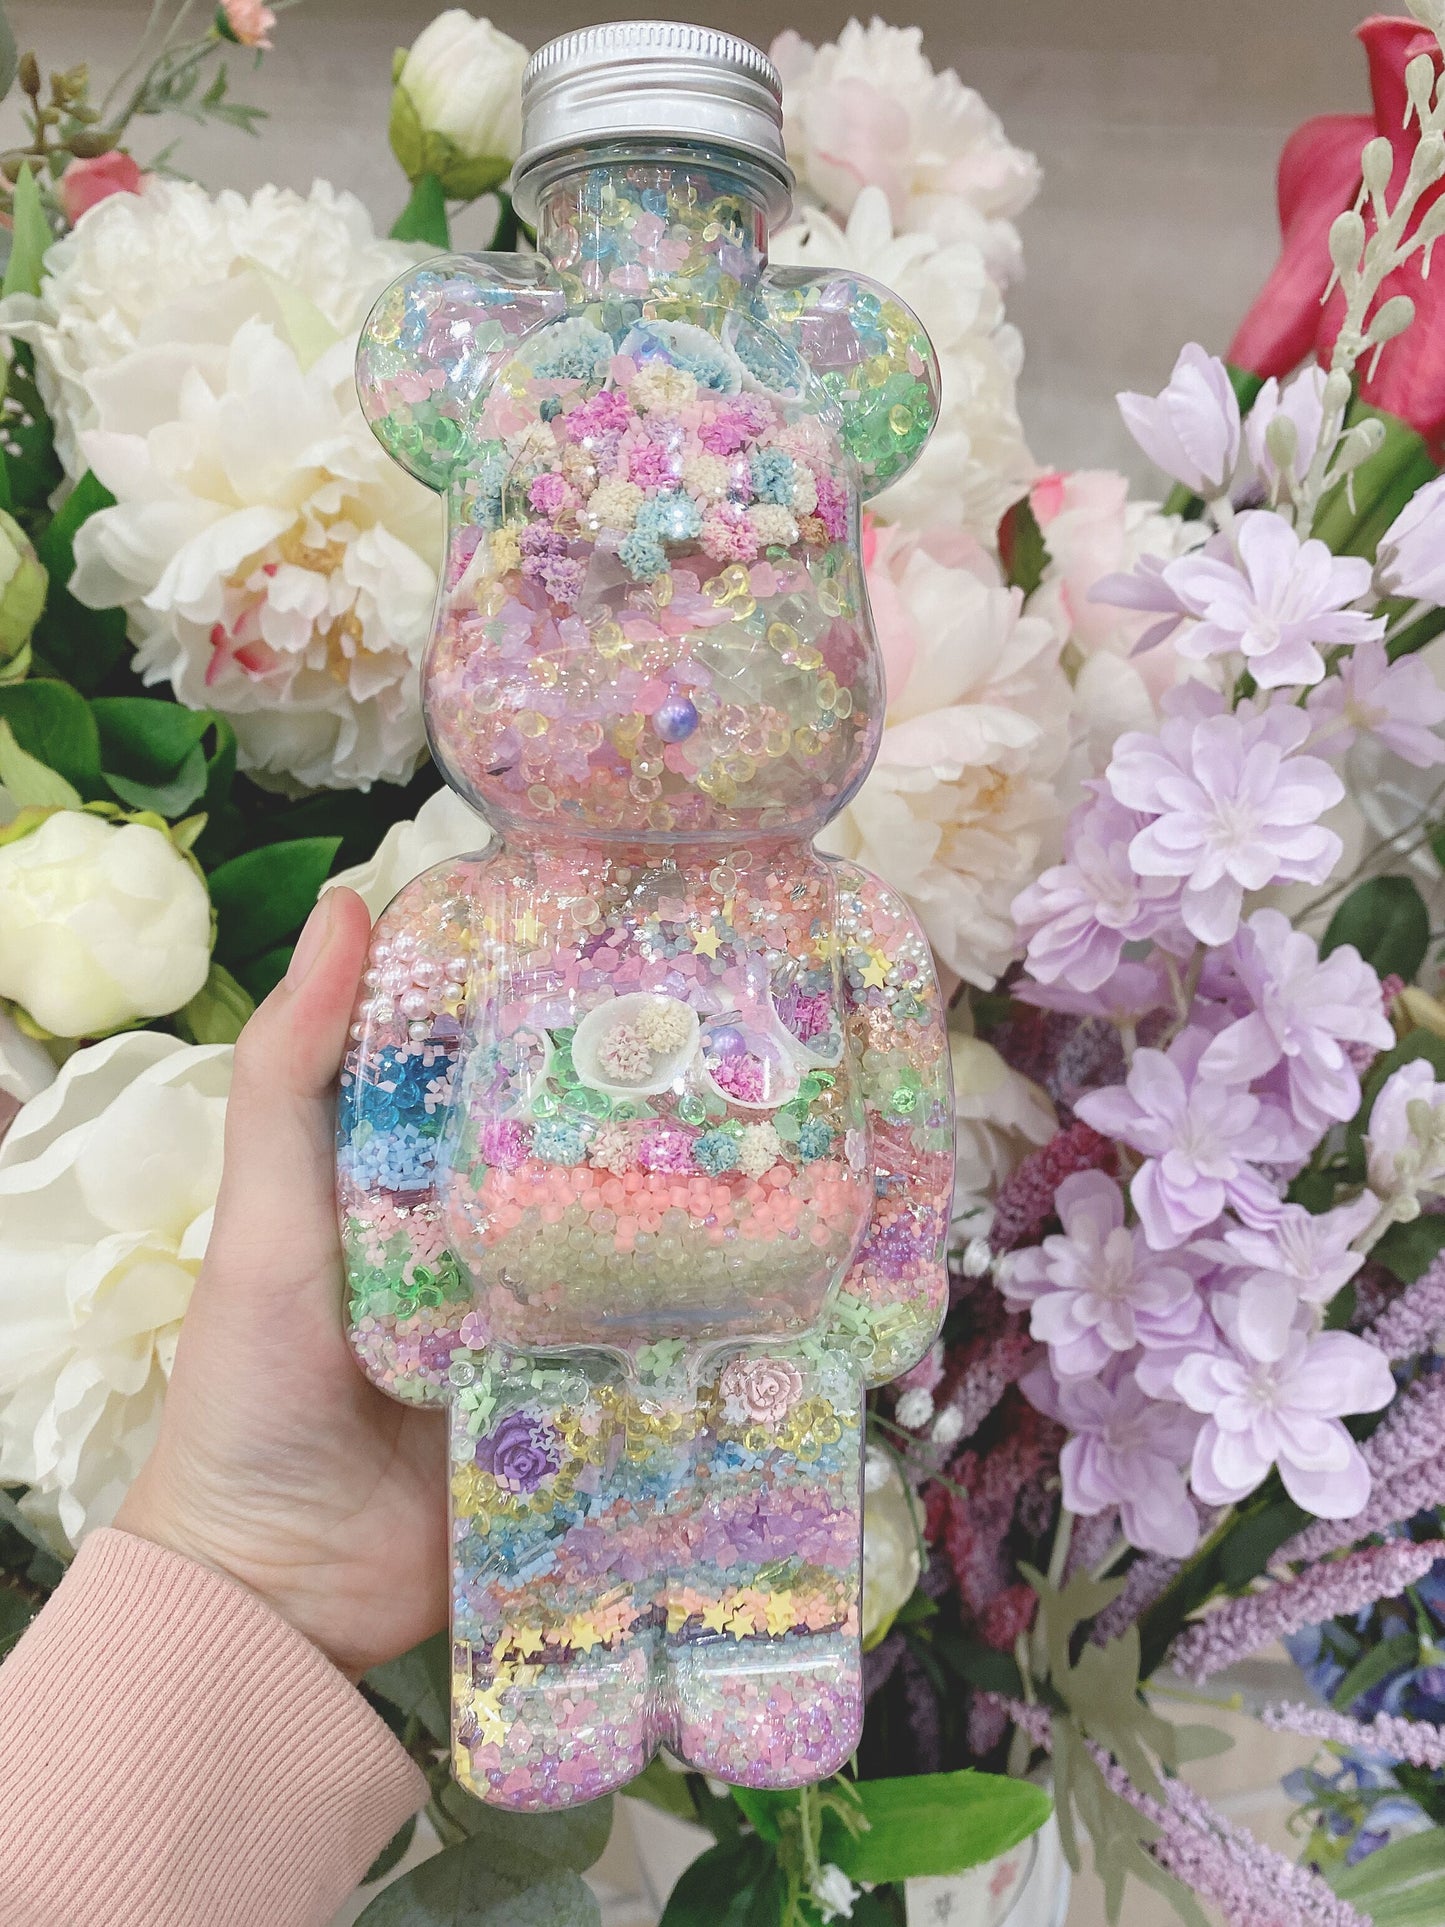 700ml Bear Colorful Spring Appointment Themed Gifts | Birthday Gifts for Women | Desk Decorations | Home Decor | Decorative Ornaments for Living Room, Bedroom, Office Desktop, Cabinets